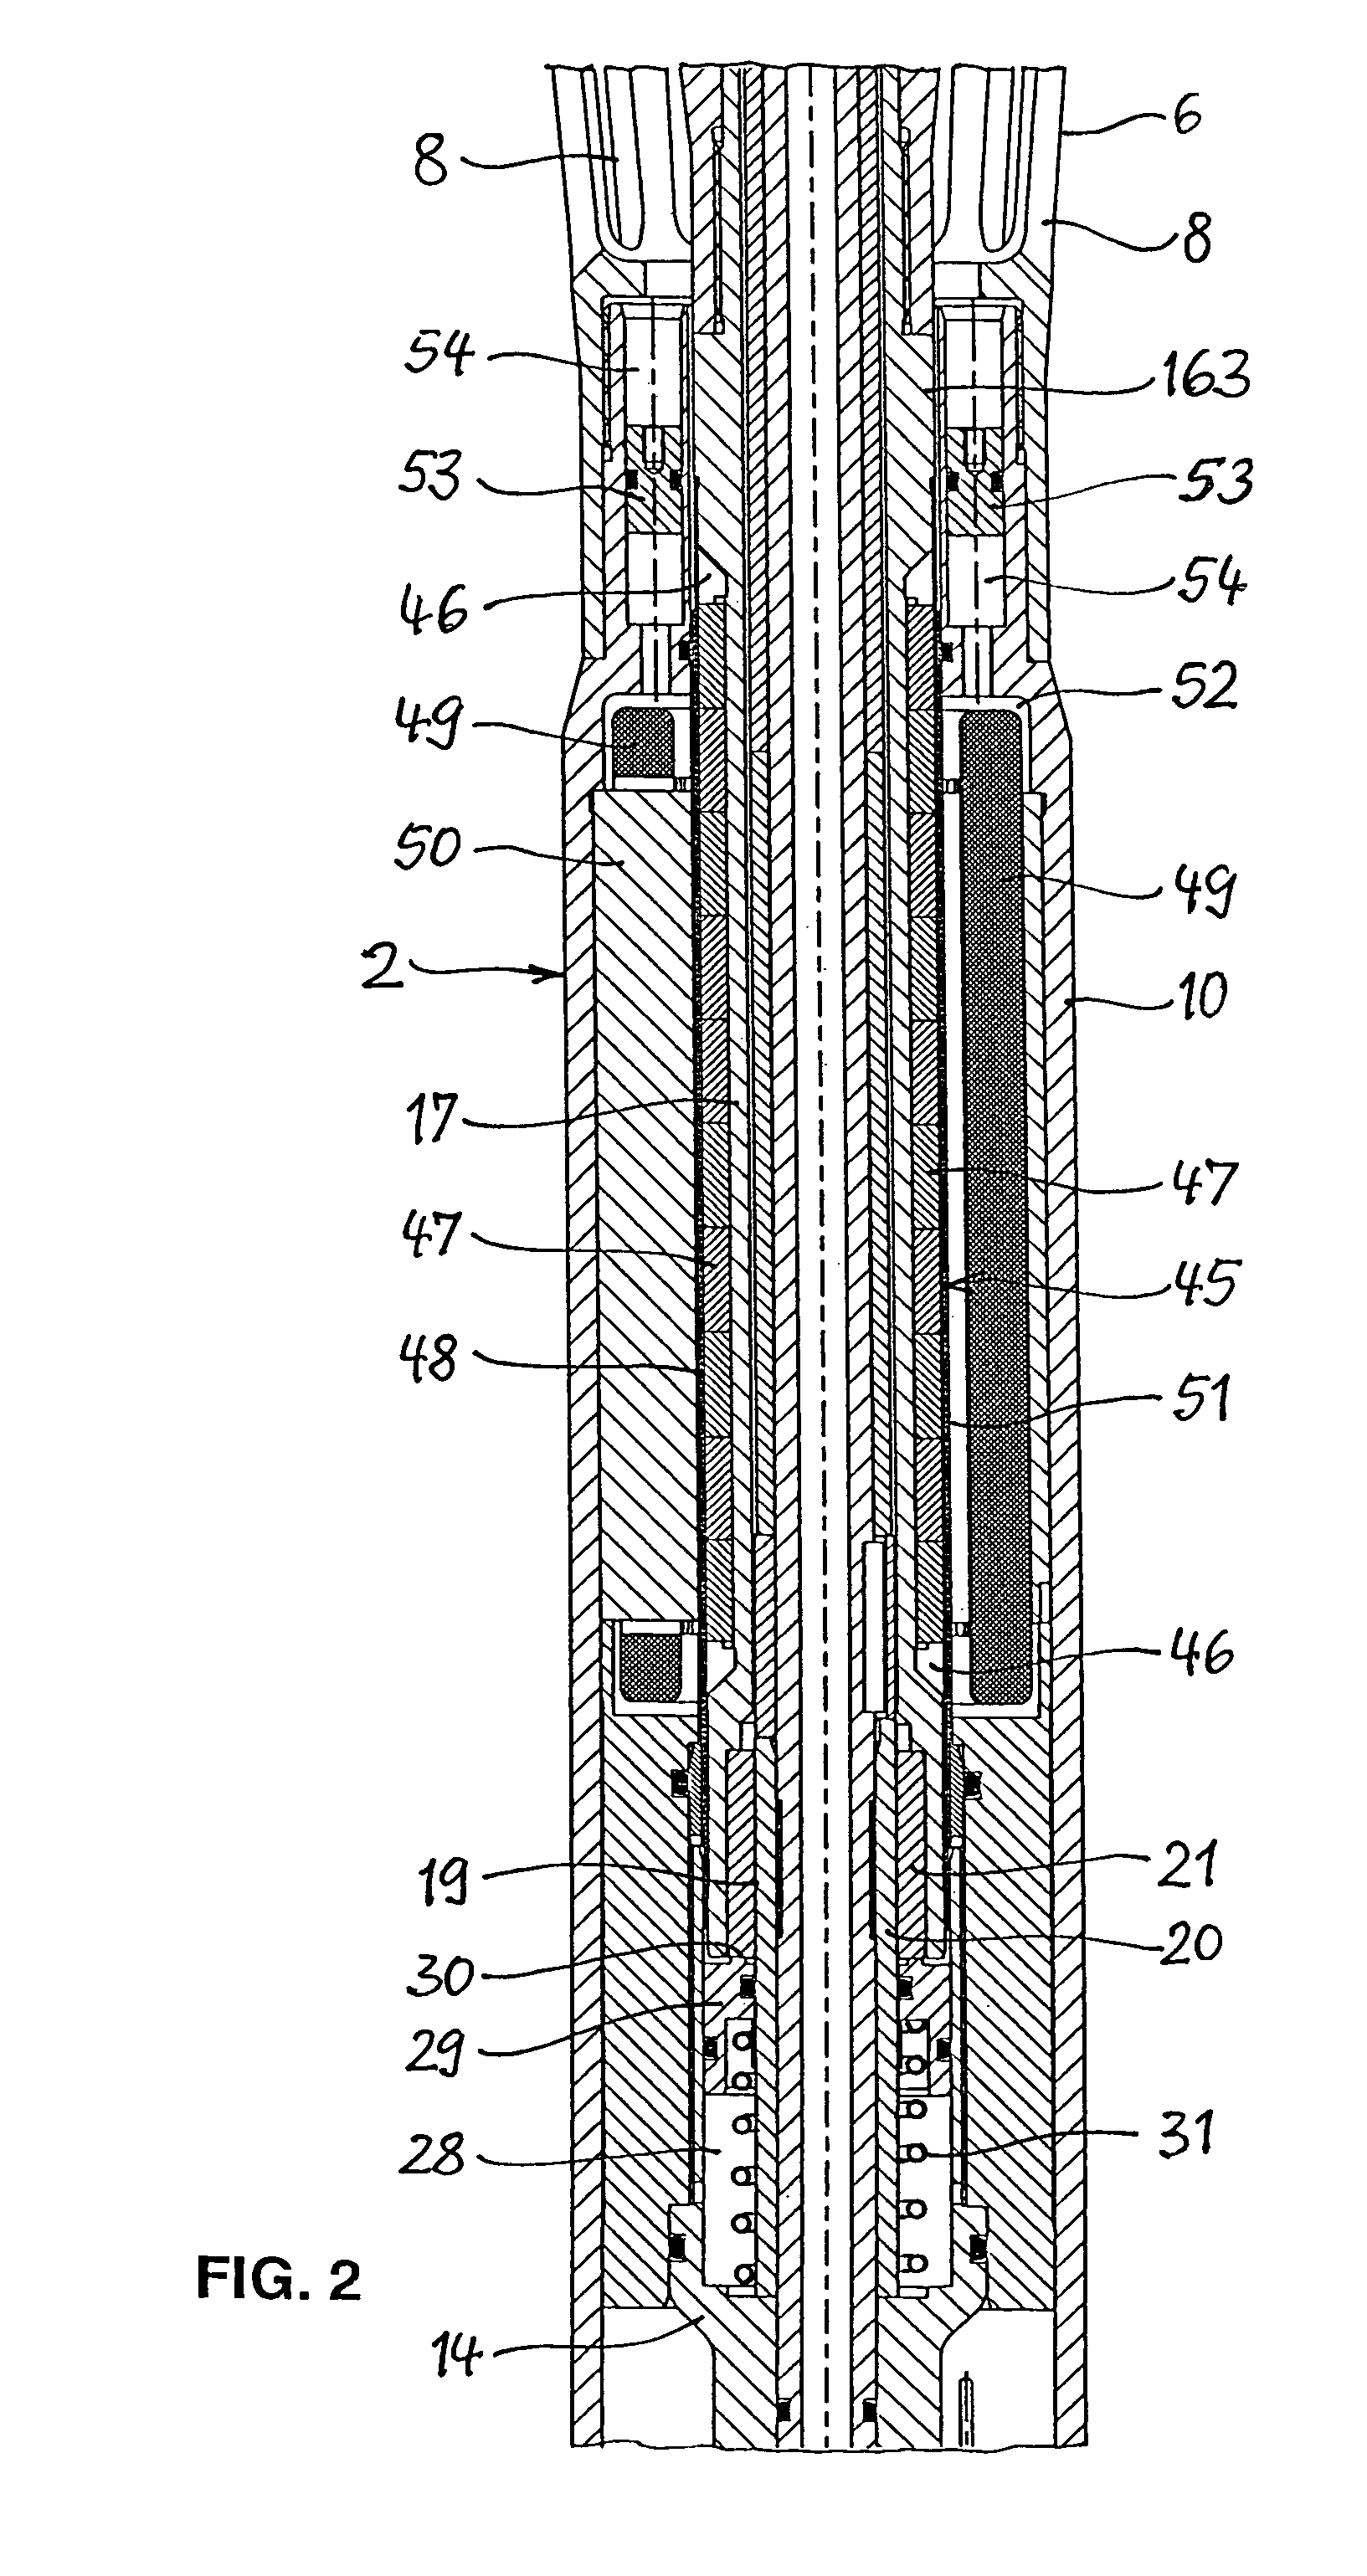 Turbine for driving a generator in a drill string